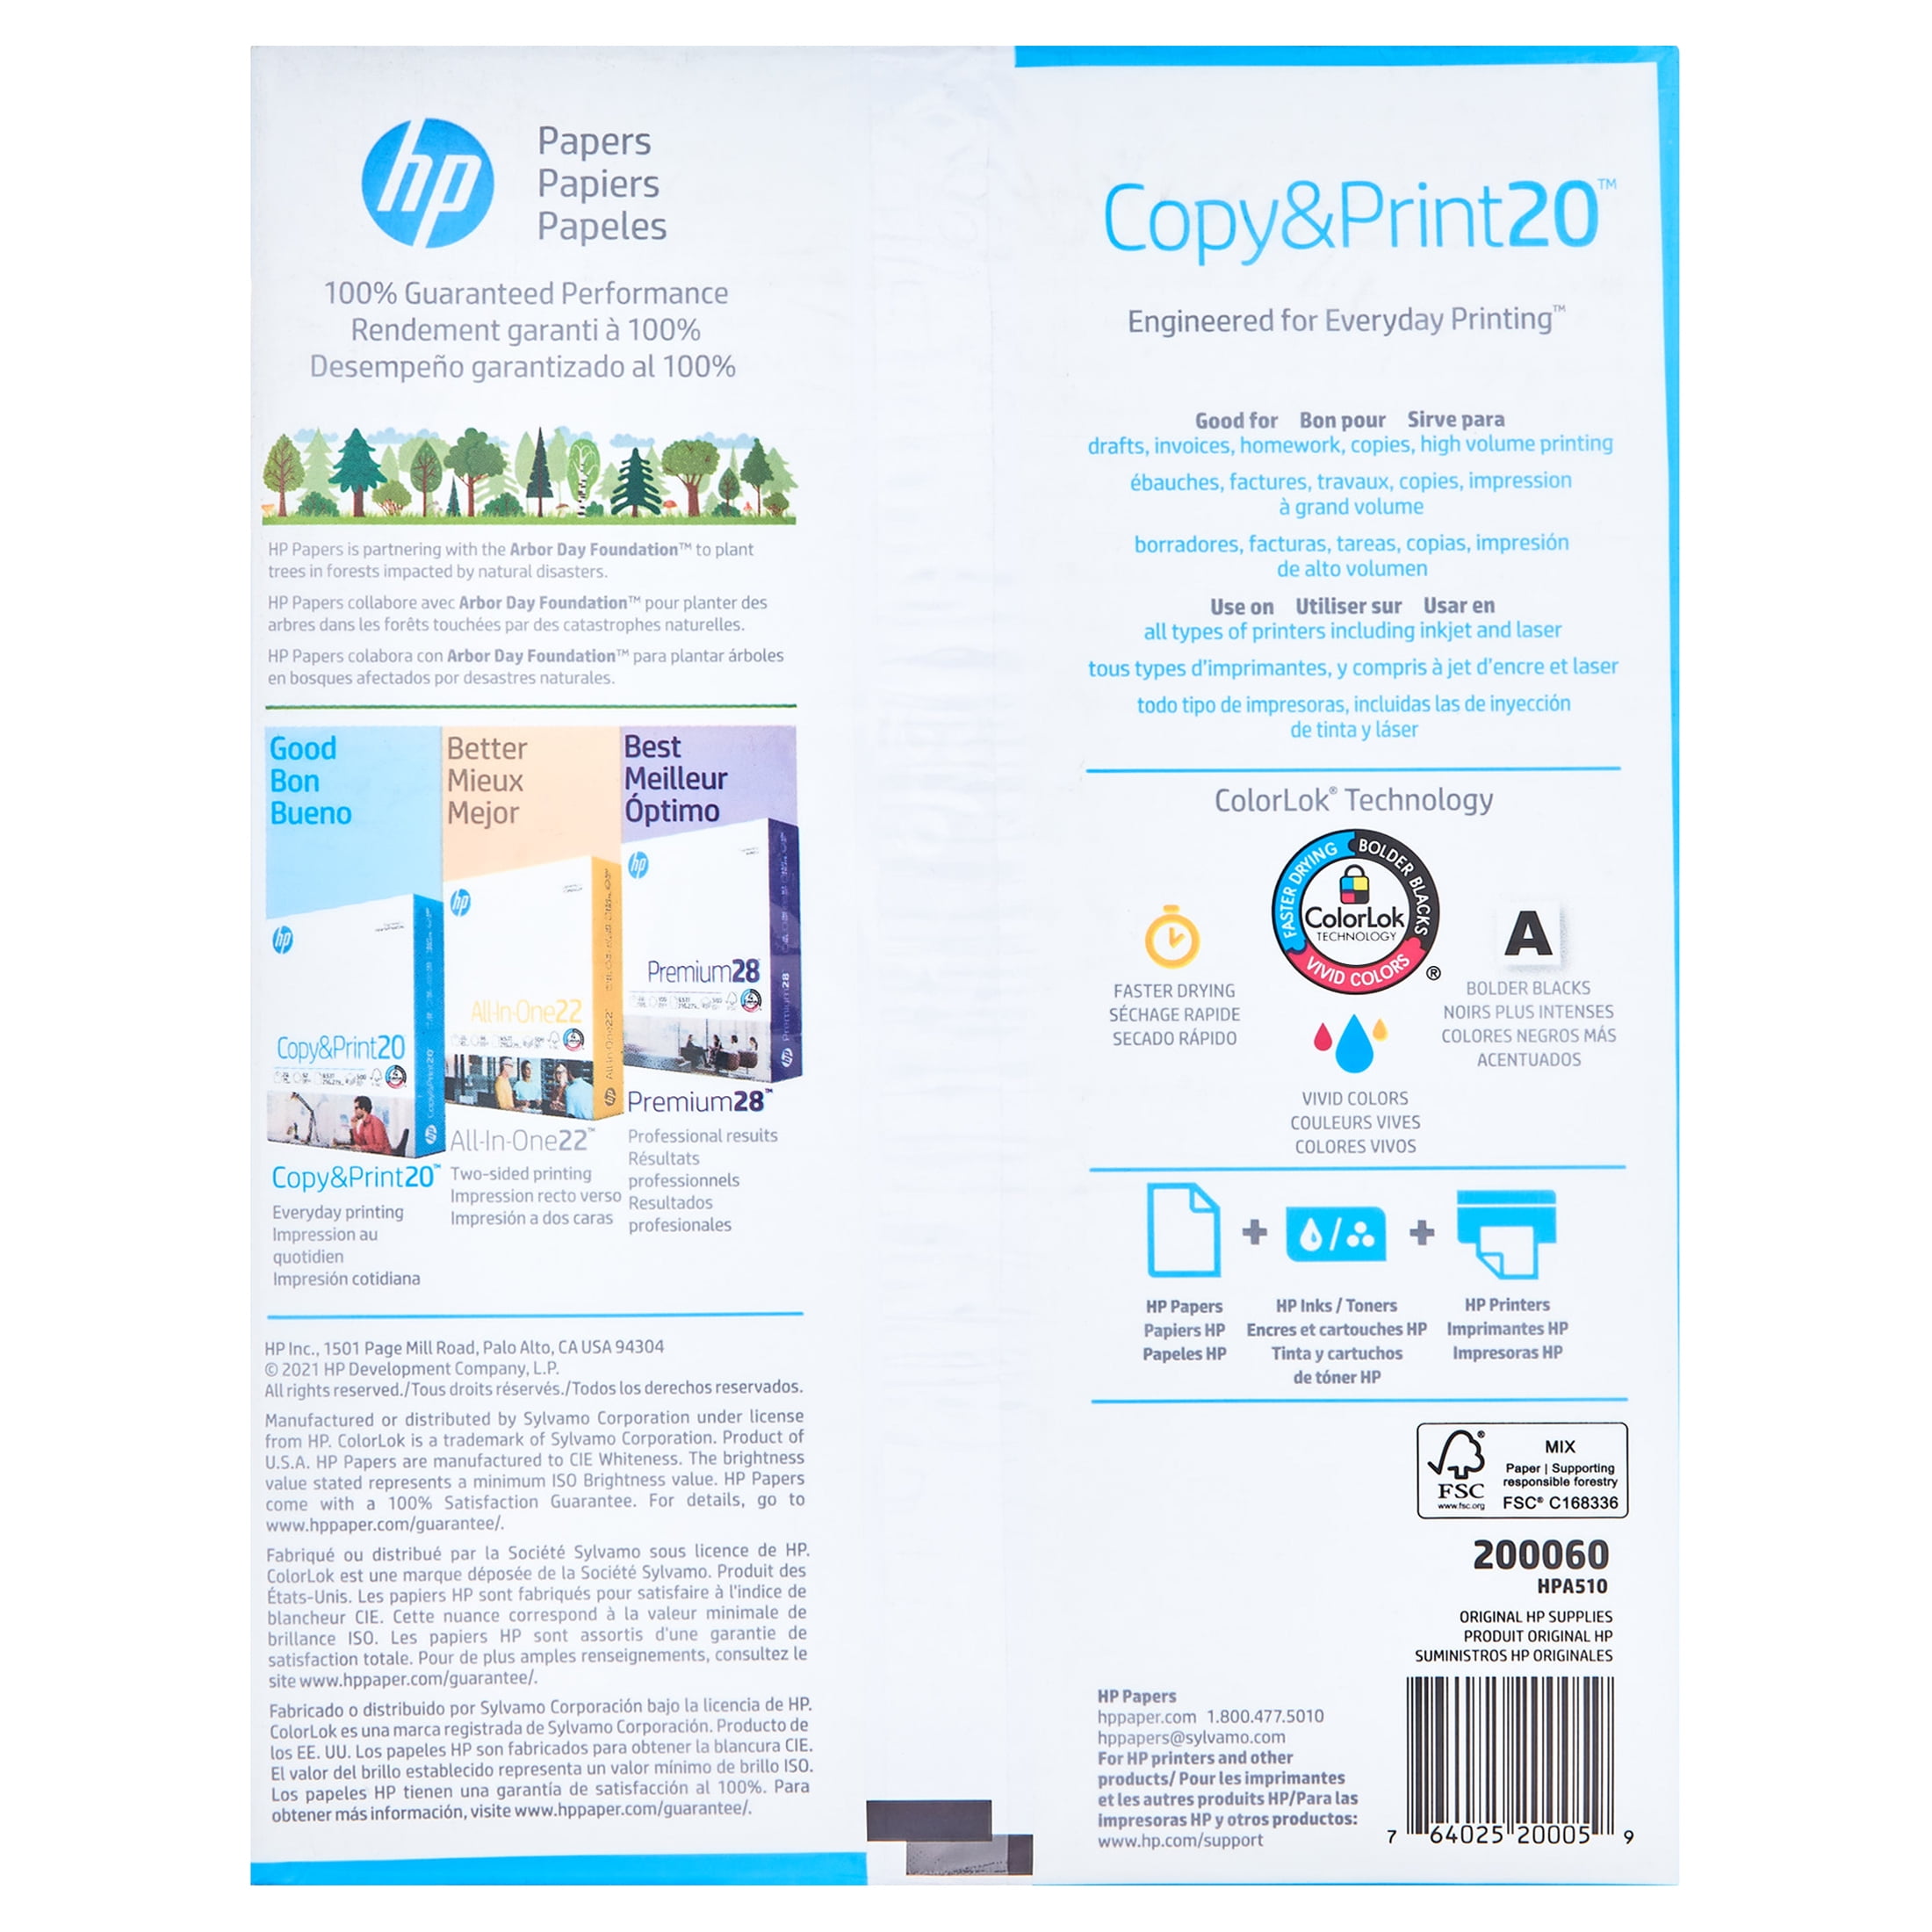 HP Printer Paper | 8.5 x 11 Paper | Combo Pack | 3 Ream Case of Office20  and 1 Ream of Premium32 | Student Value Pack | Made in USA - FSC Certified